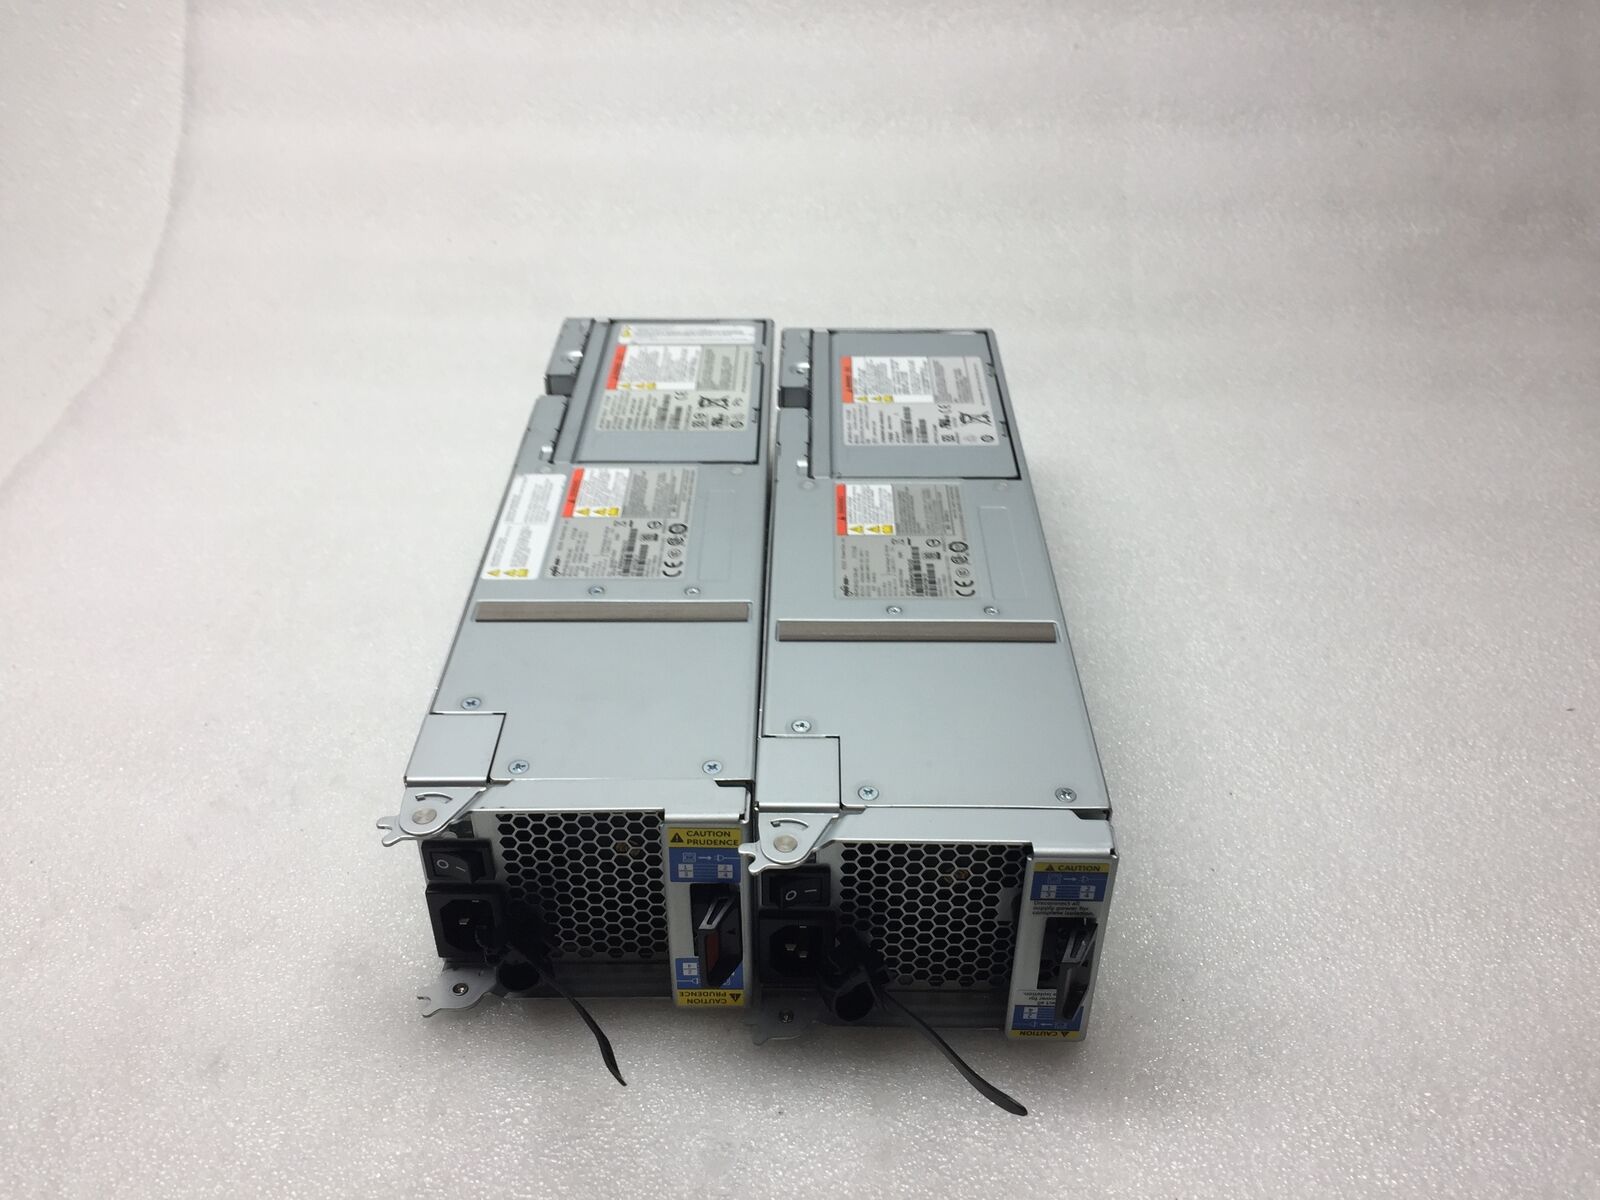 Lot of 2 Power One HB-PCM-02-764-AC Power Supply w Battery AP-BAT01-022-01 AS-IS